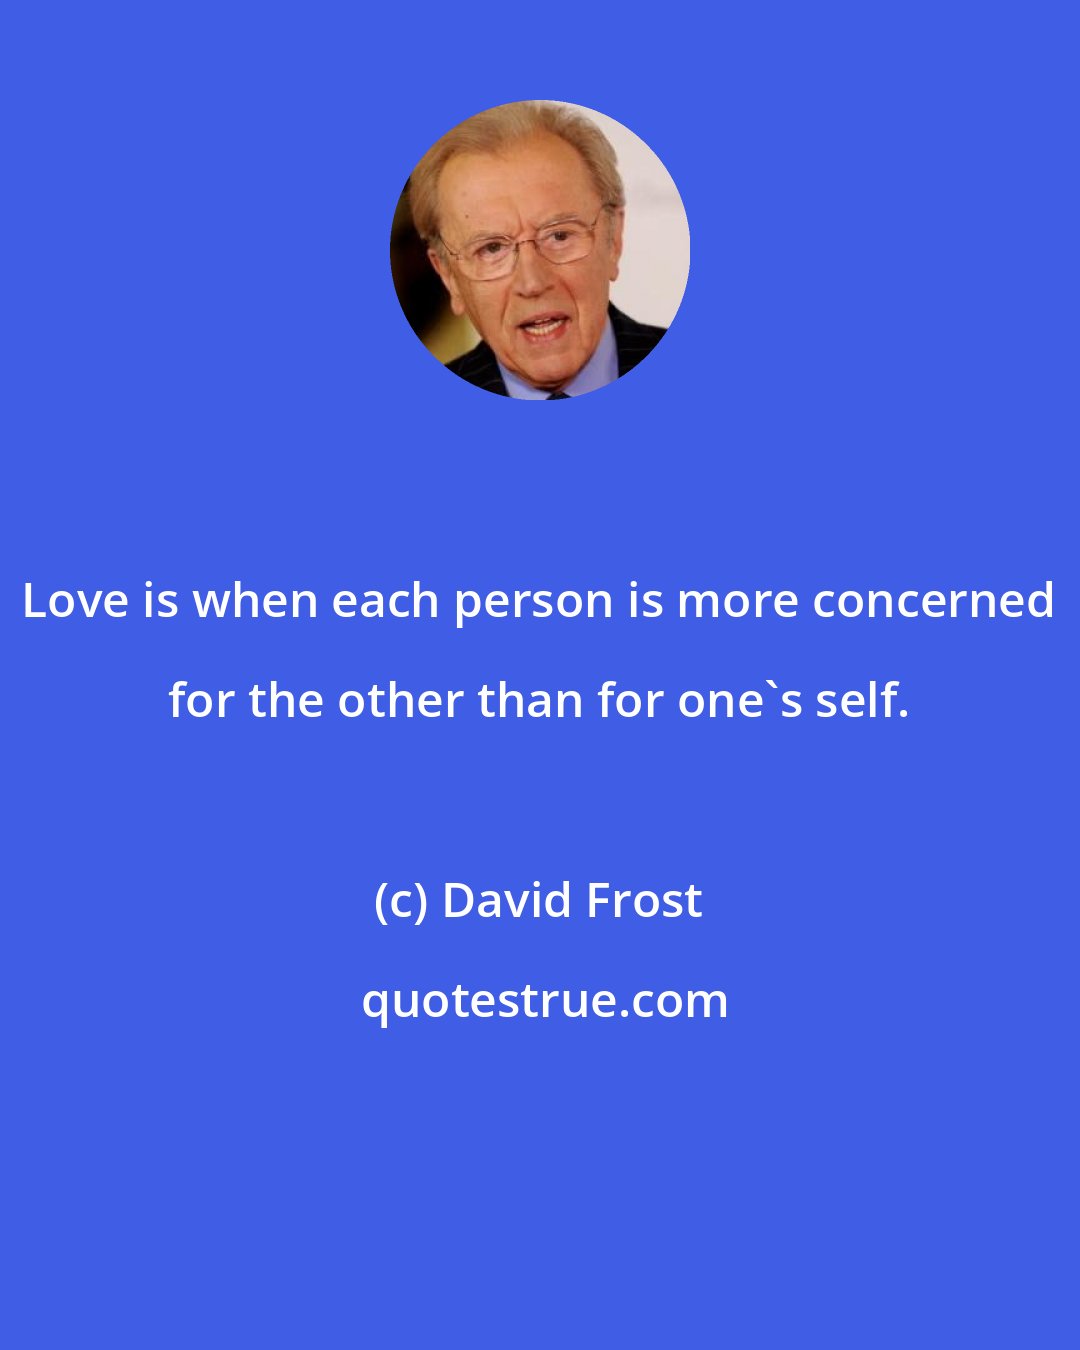 David Frost: Love is when each person is more concerned for the other than for one's self.